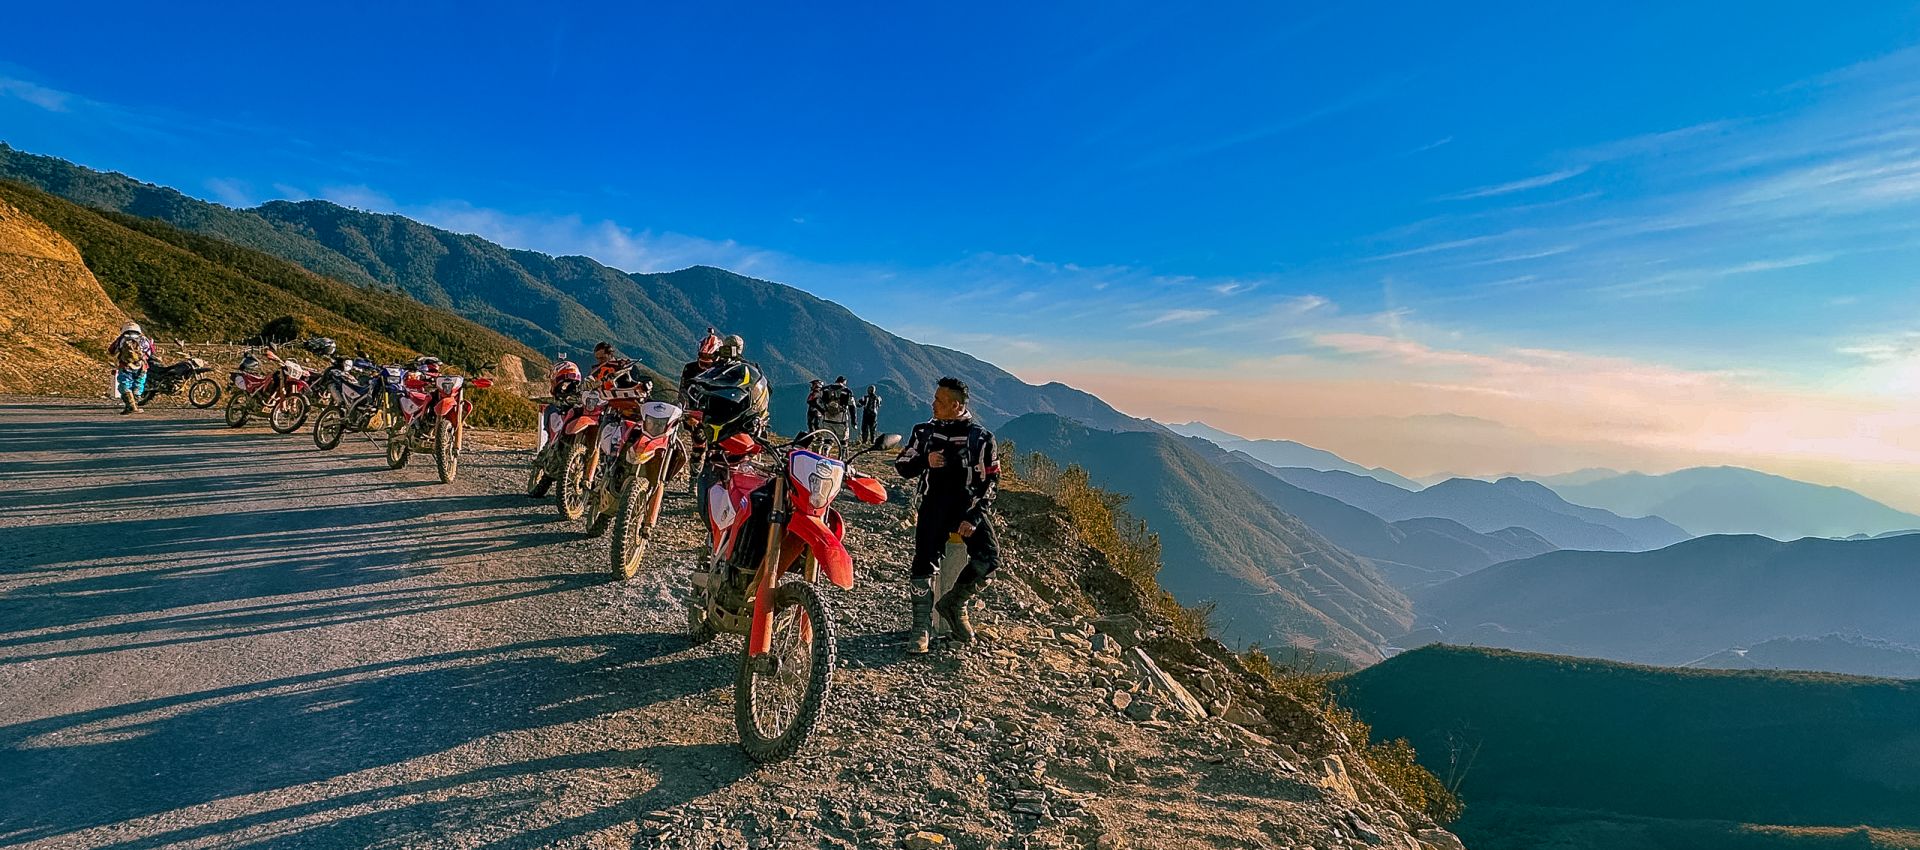 (29Th April - 7Th May): Roaring Into Adventure - 8 Days Of Thrilling Motorcycle Exploration In Northeast Vietnam